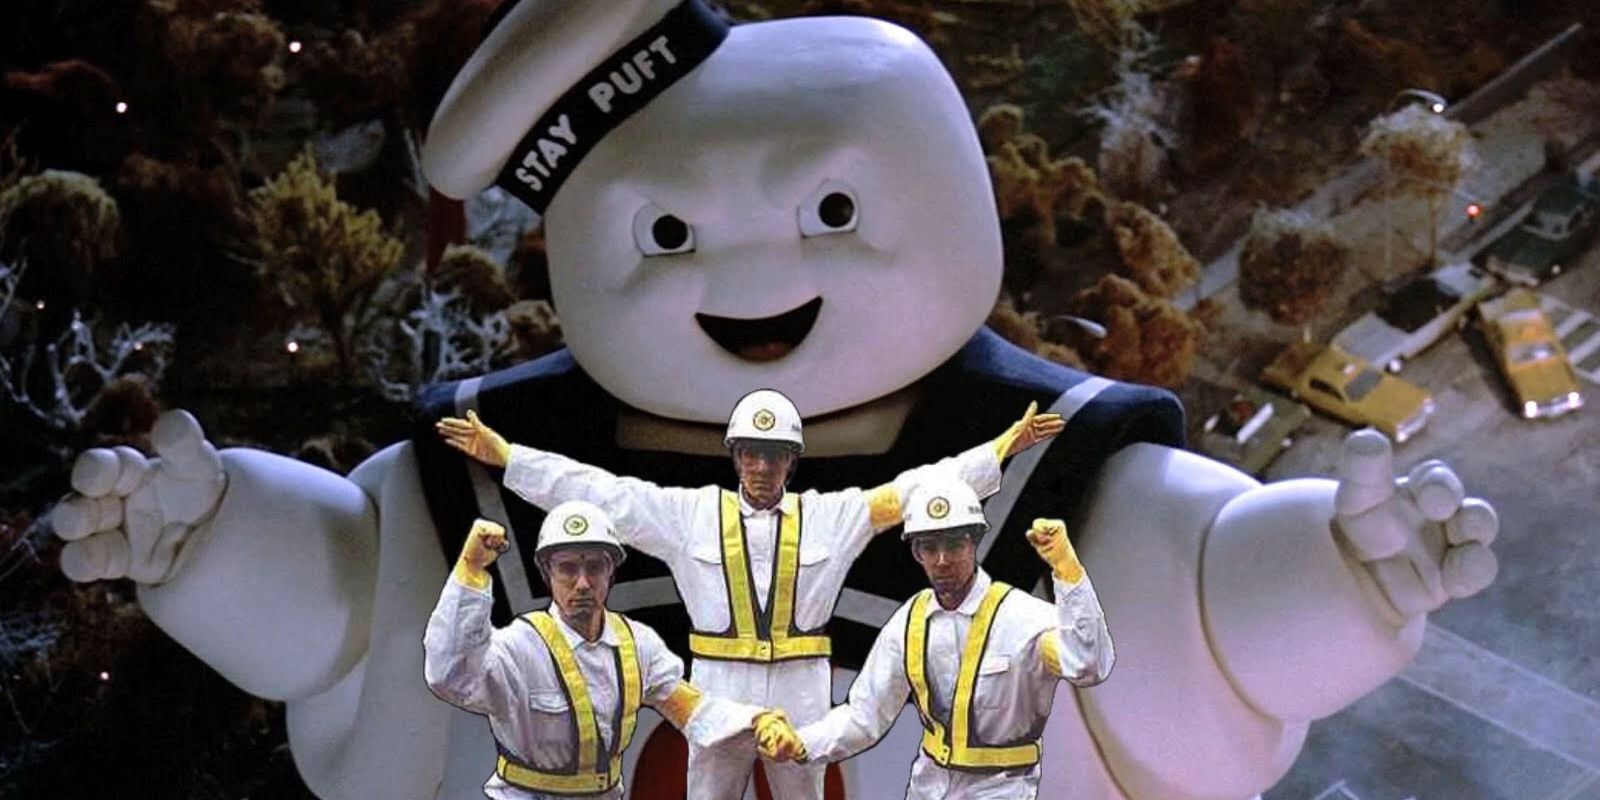 Beastie Boys stand in Intergalactic pose with Stay Puft Marshmallow Man